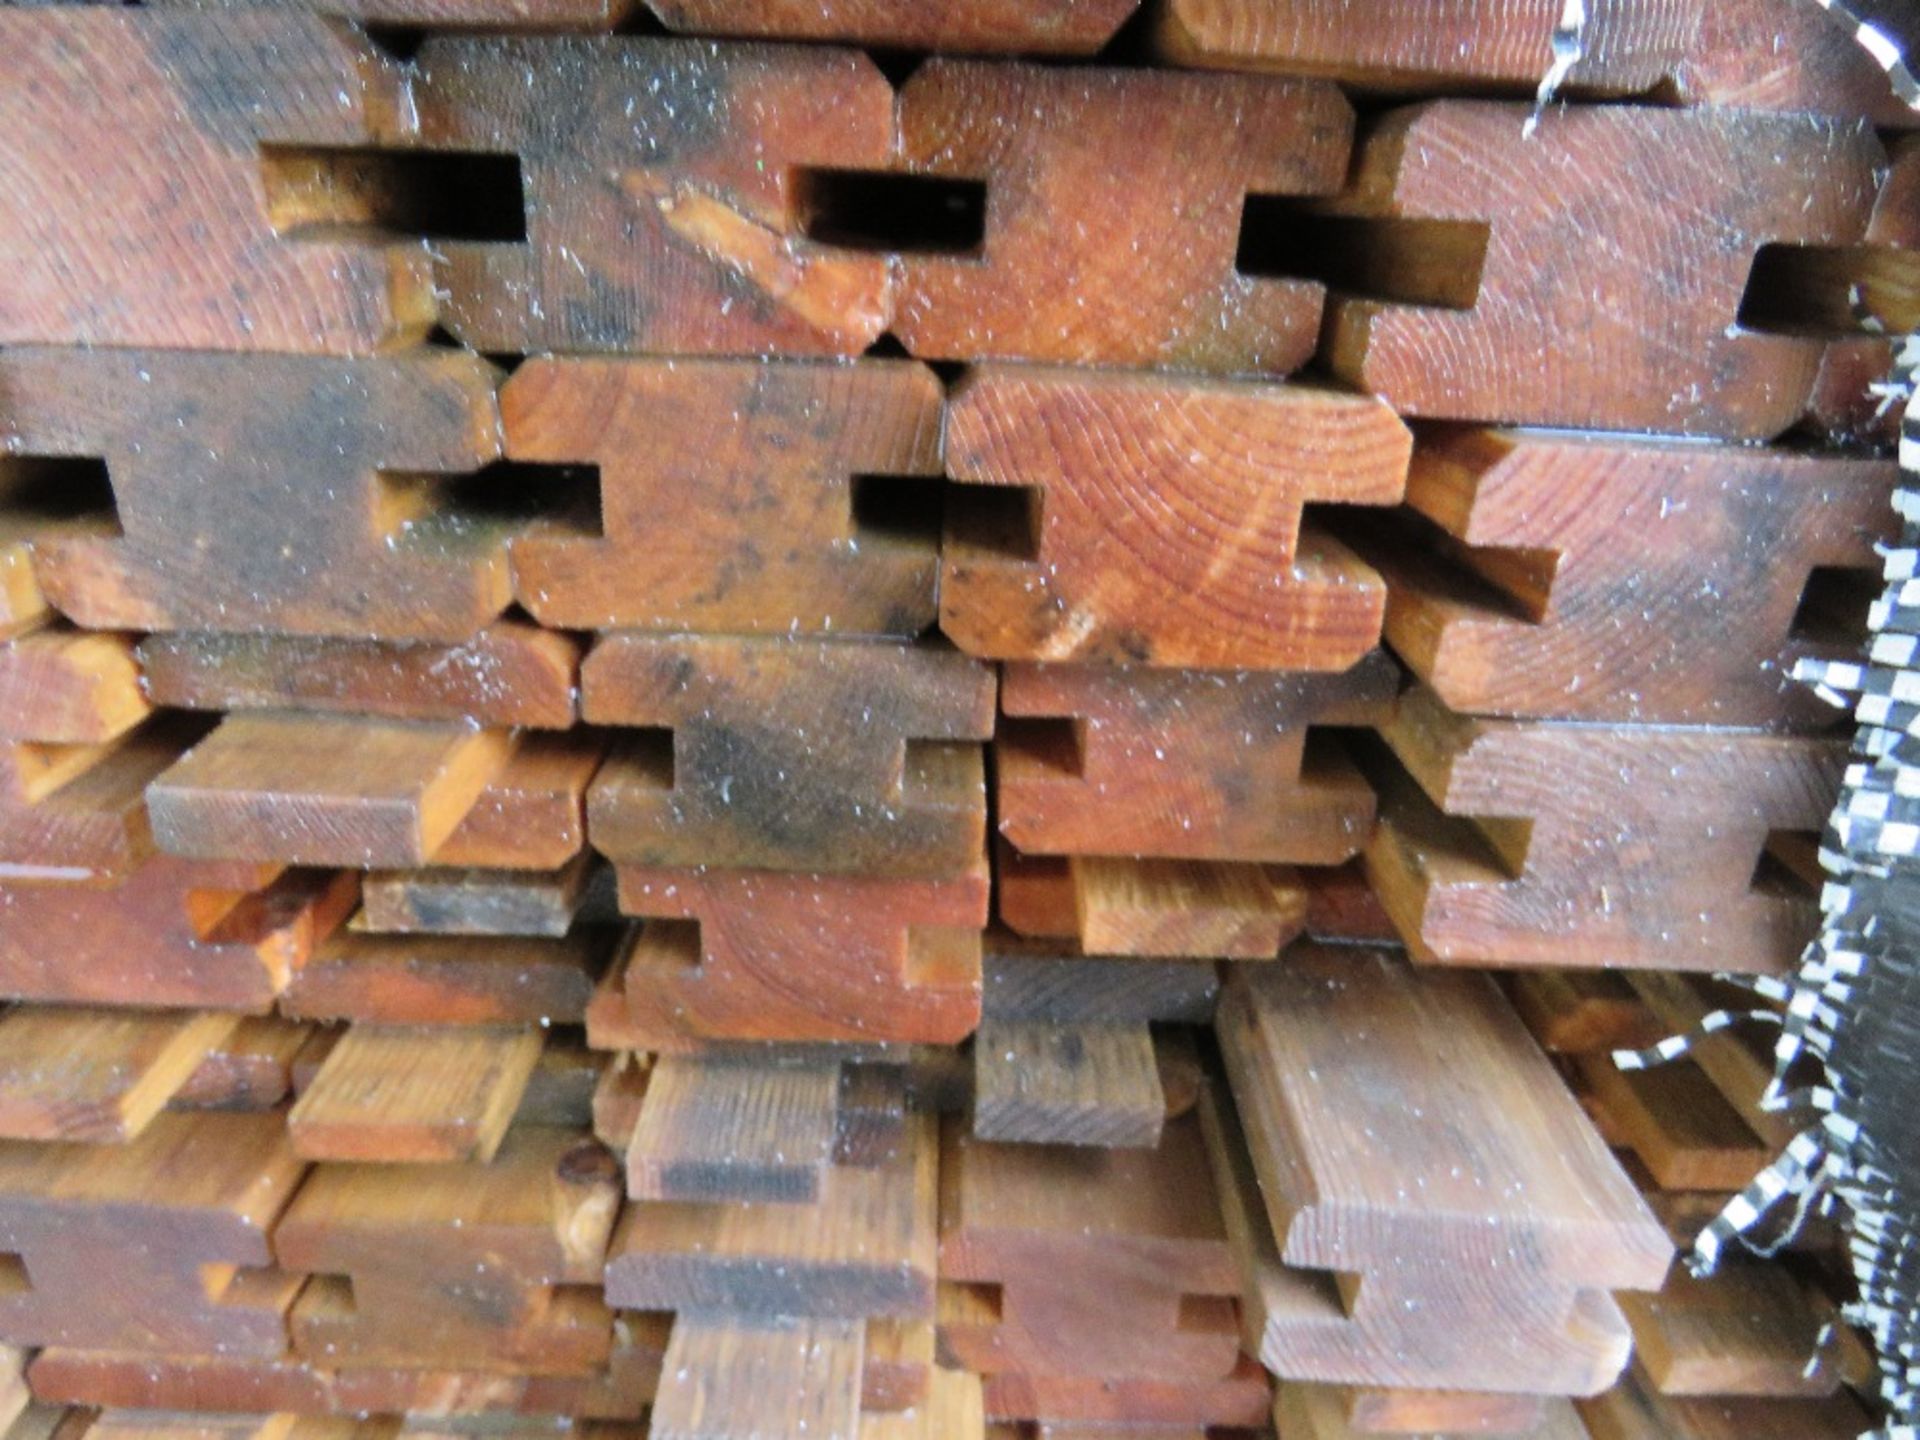 PACK OF H SECTIONED CONSTRUCTION TIMBER, UNTREATED. SIZE: 1.75M LENGTH X 55MM WIDE X 35MM DEPTH APPR - Image 3 of 4